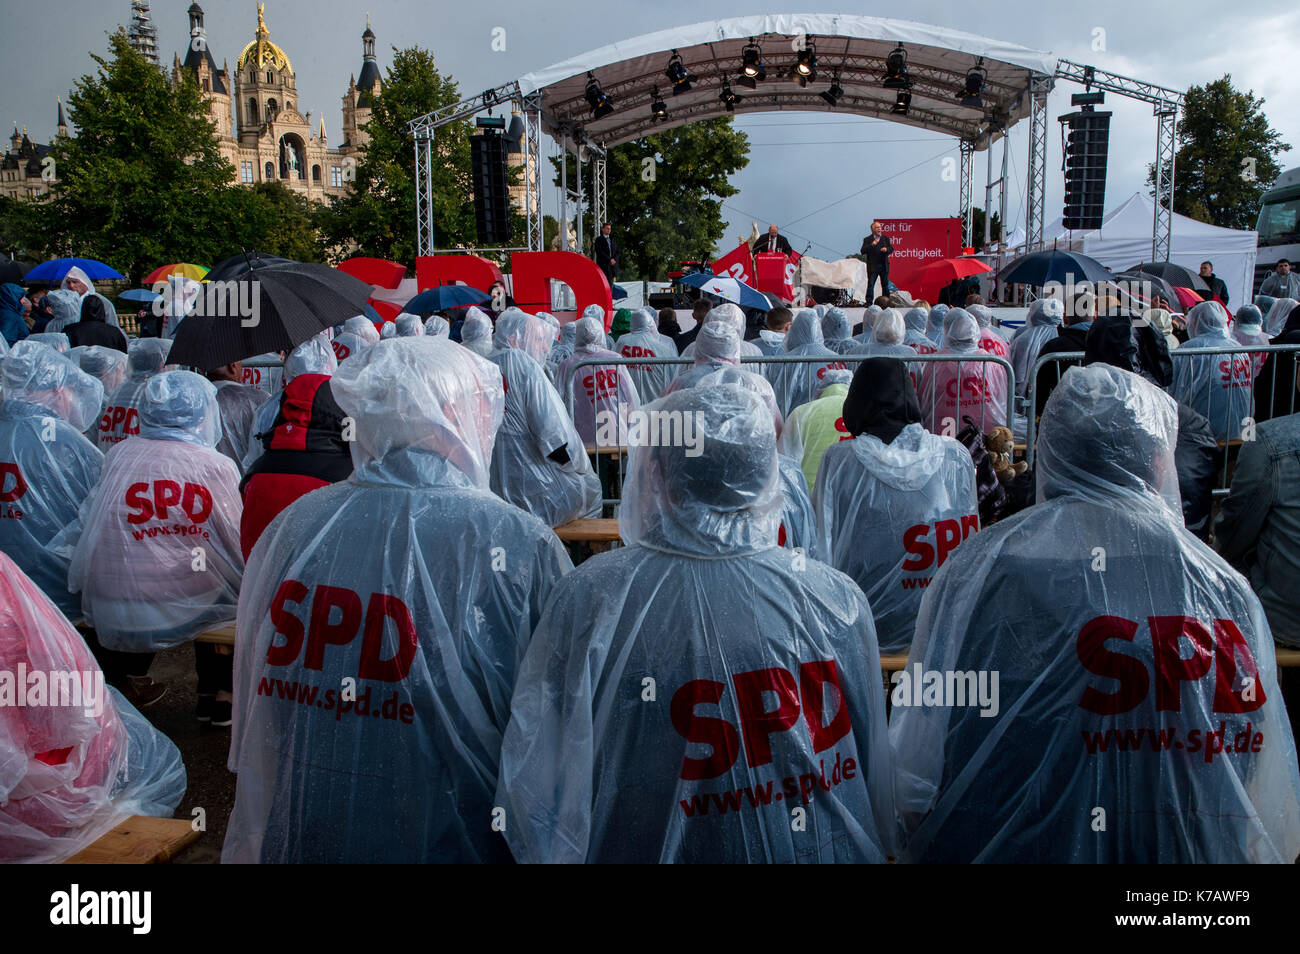 Schwerin, Germany. 15th Sep, 2017. dpatop - Martin Schulz, candidate for chancellorship from the Social Democratic Party of Germany (SPD), speaking during heavy rainfall at an election campaign event in front of an audience of about 400 people in Schwerin, Germany, 15 September 2017. Photo: Jens Büttner/dpa-Zentralbild/dpa/Alamy Live News Stock Photo